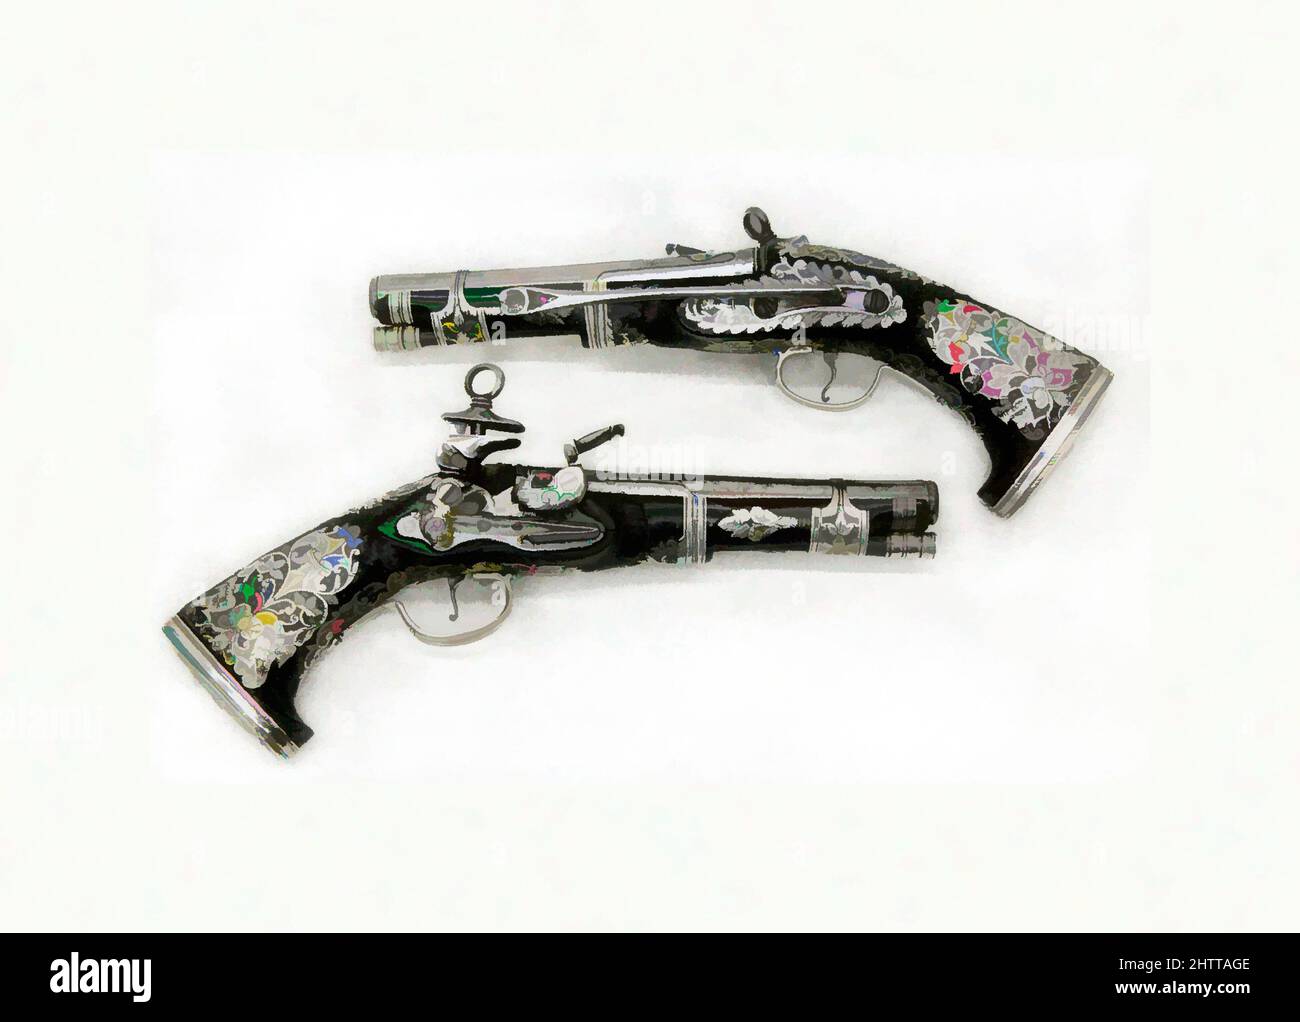 Art inspired by Pair of Miquelet Flintlock Pistols, dated 1757, Colonial Spanish, probably Mexico, Steel, wood (family leguminosae), silver, L.: 10 7/8 in. (27.5 cm); L. of barrel: 6 in. (15.2 cm);L.: 10 5/8 in. (27.2 cm); L. of barrel: 6 in. (15.2 cm), Firearms-Guns-Miquelet, Signed, Classic works modernized by Artotop with a splash of modernity. Shapes, color and value, eye-catching visual impact on art. Emotions through freedom of artworks in a contemporary way. A timeless message pursuing a wildly creative new direction. Artists turning to the digital medium and creating the Artotop NFT Stock Photo